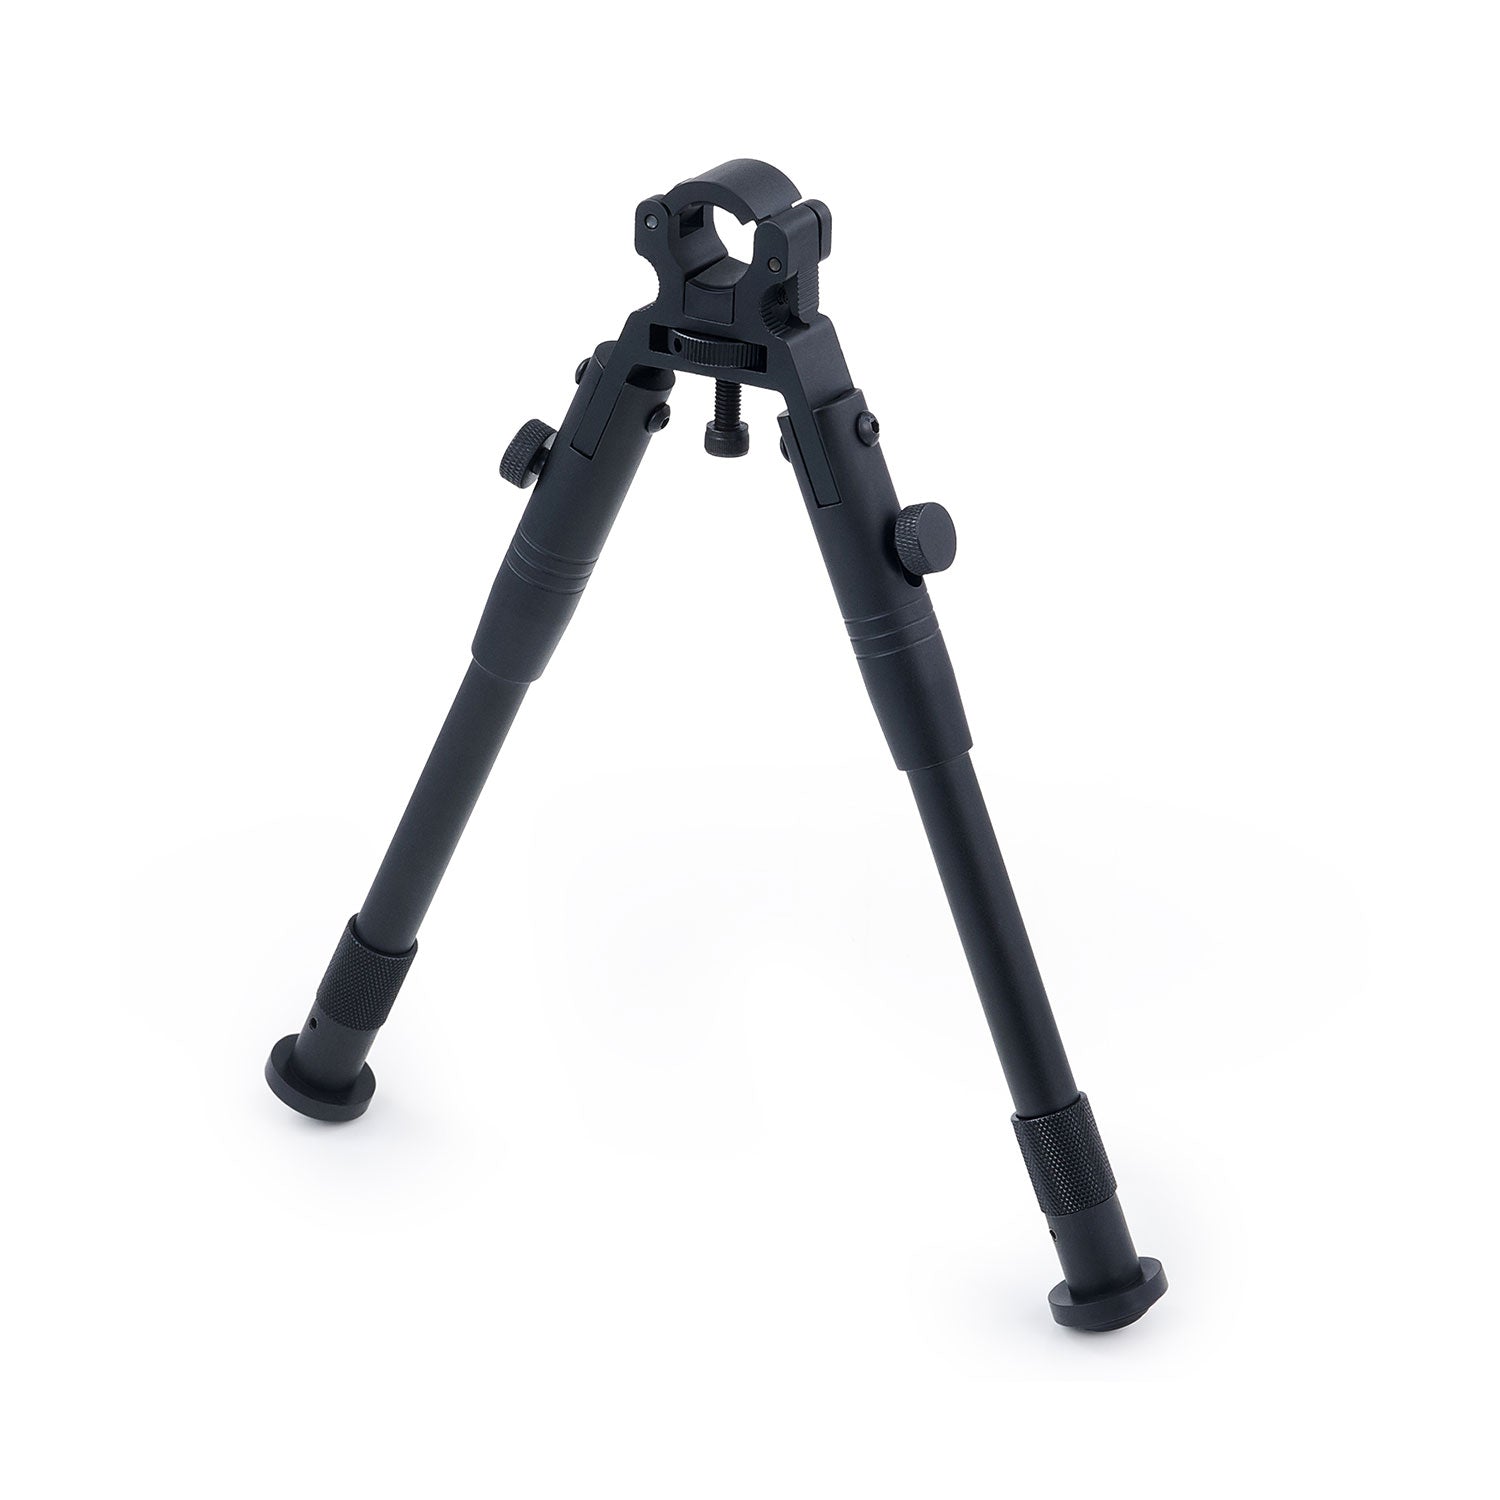 Rifle Bipod with Quick Release Spring Clamp for 0.43″ to 0.75'' Barrels Adjustable Leg